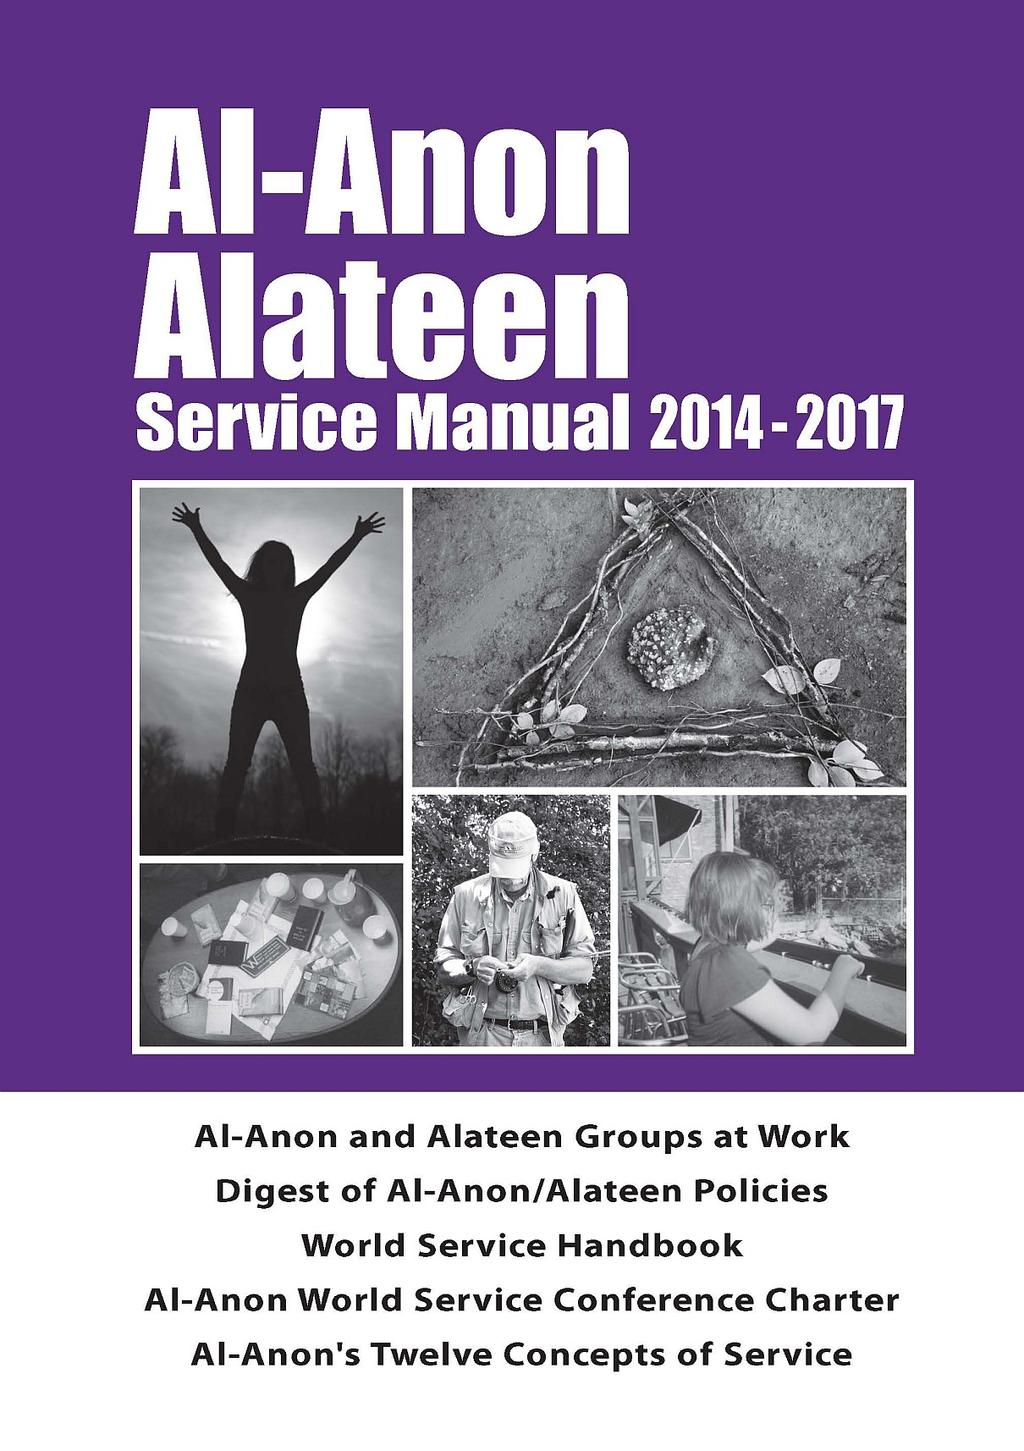 It is suggested that all players have their 2014-2017 Al-Anon/Alateen Service Manuals.